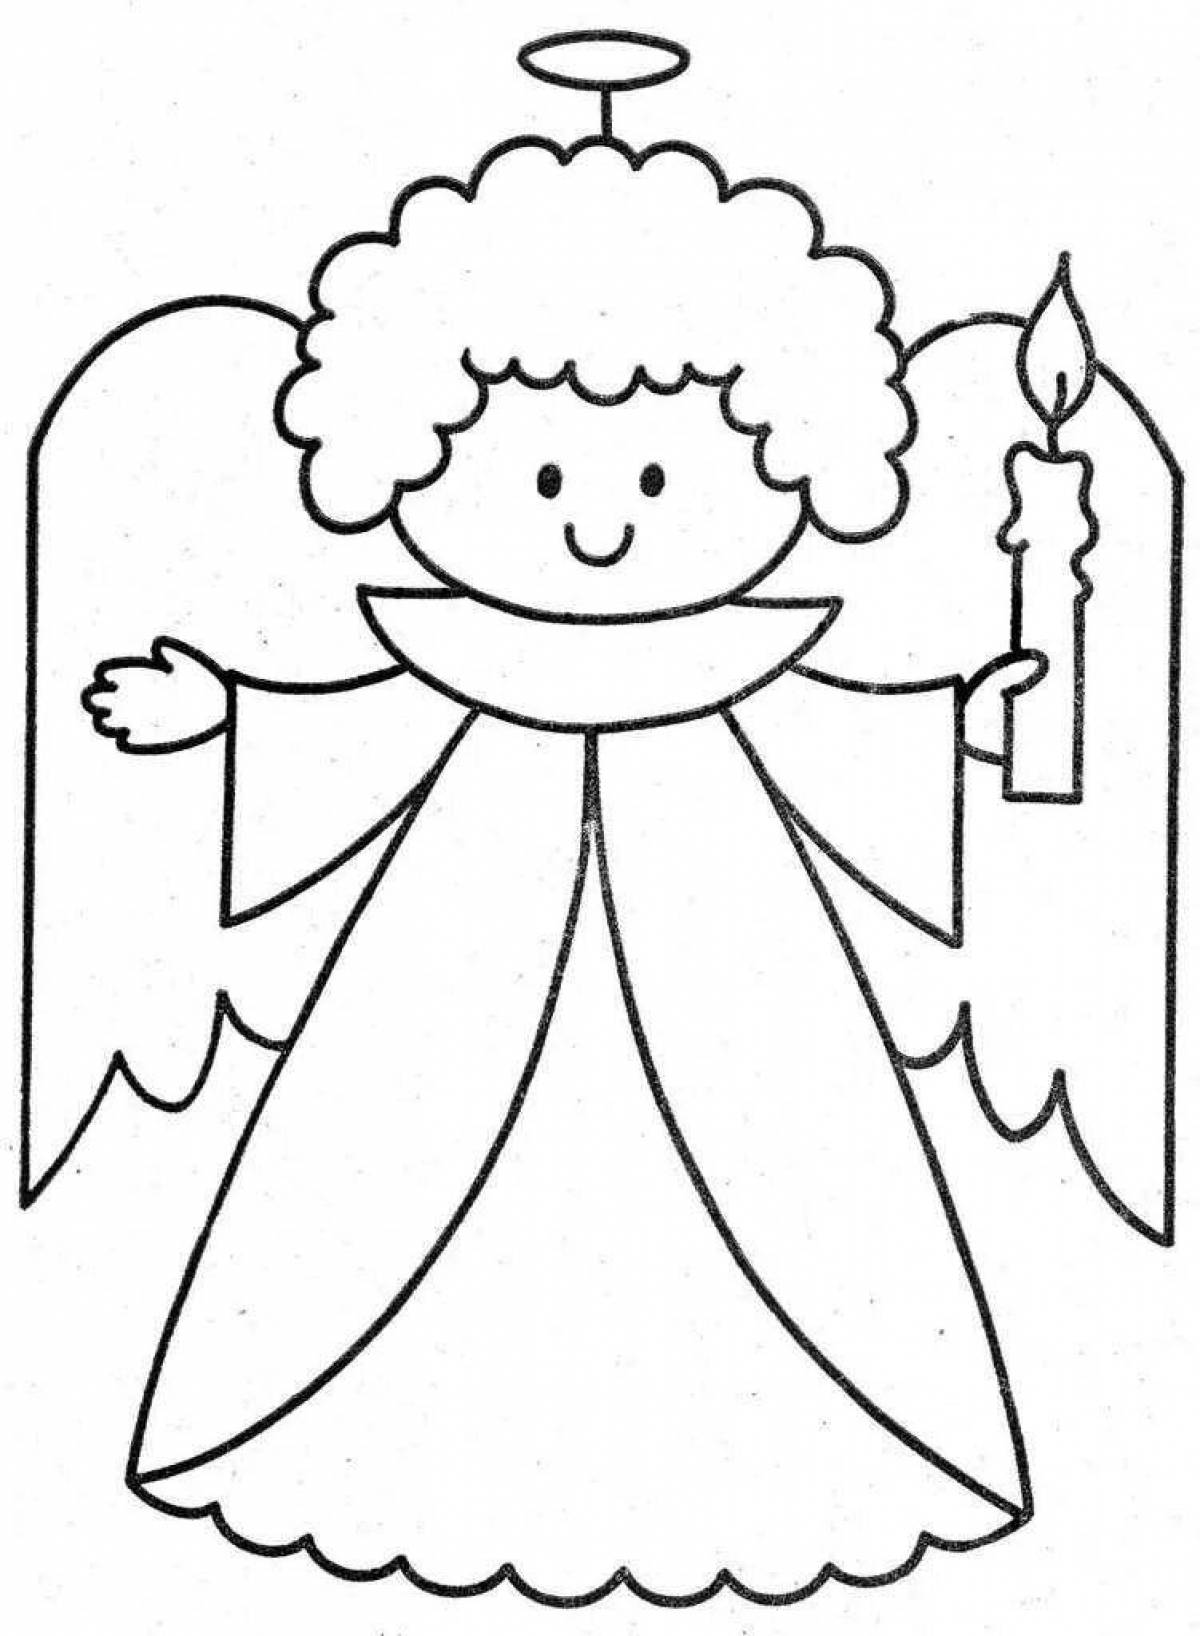 Glorious christmas angel coloring pages for kids